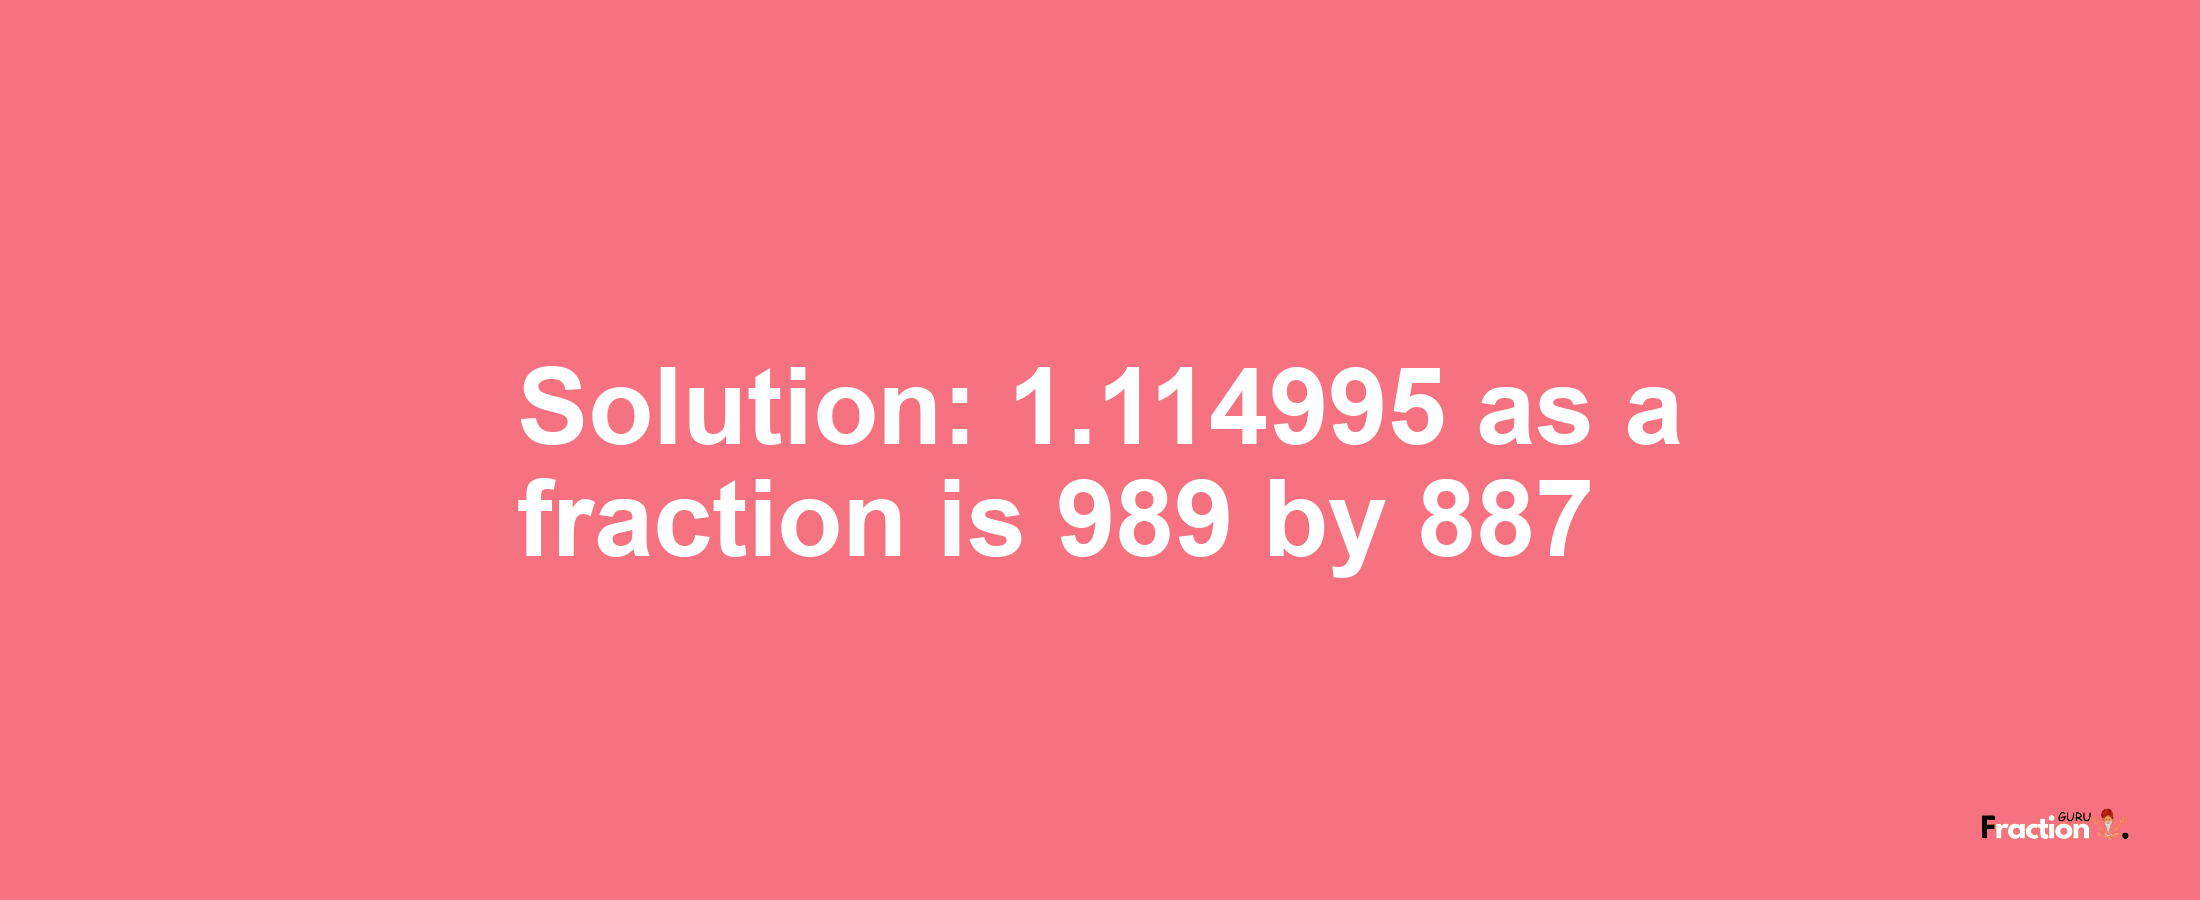 Solution:1.114995 as a fraction is 989/887